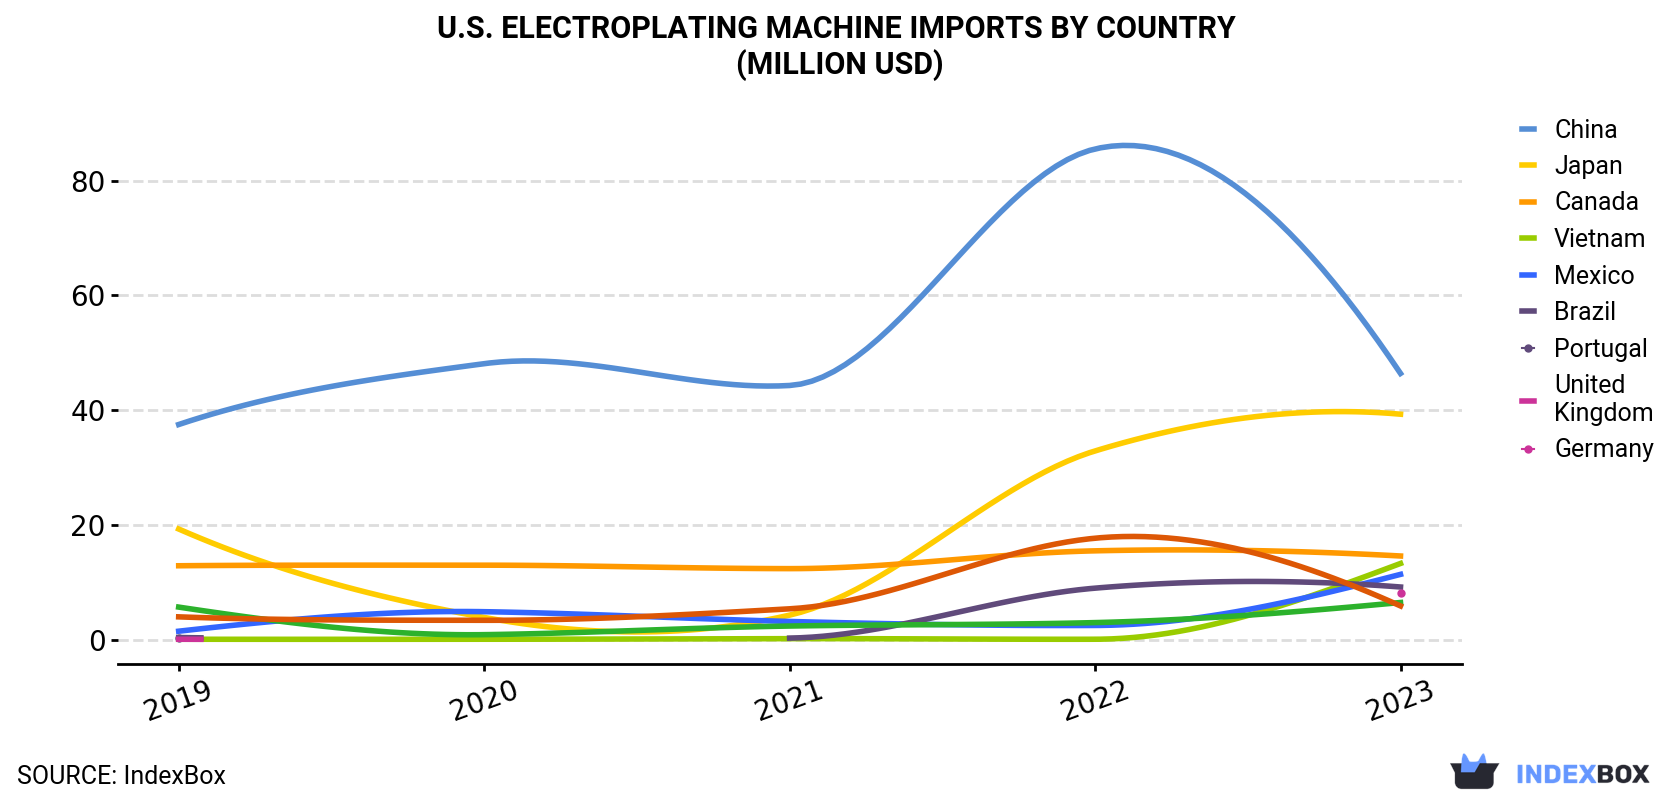 U.S. Electroplating Machine Imports By Country (Million USD)